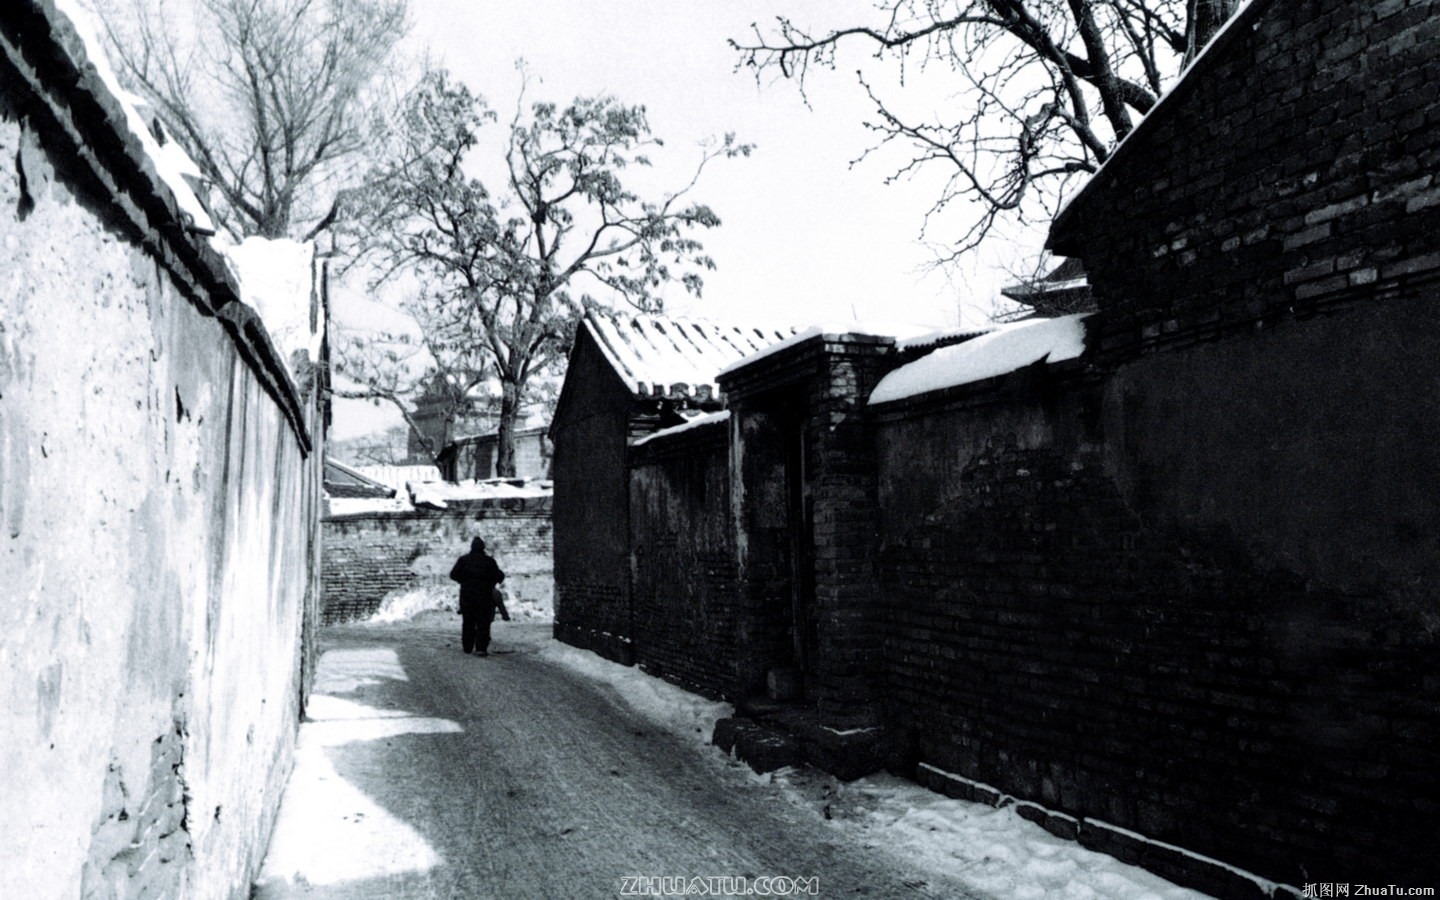 Old Hutong life for old photos wallpaper #28 - 1440x900